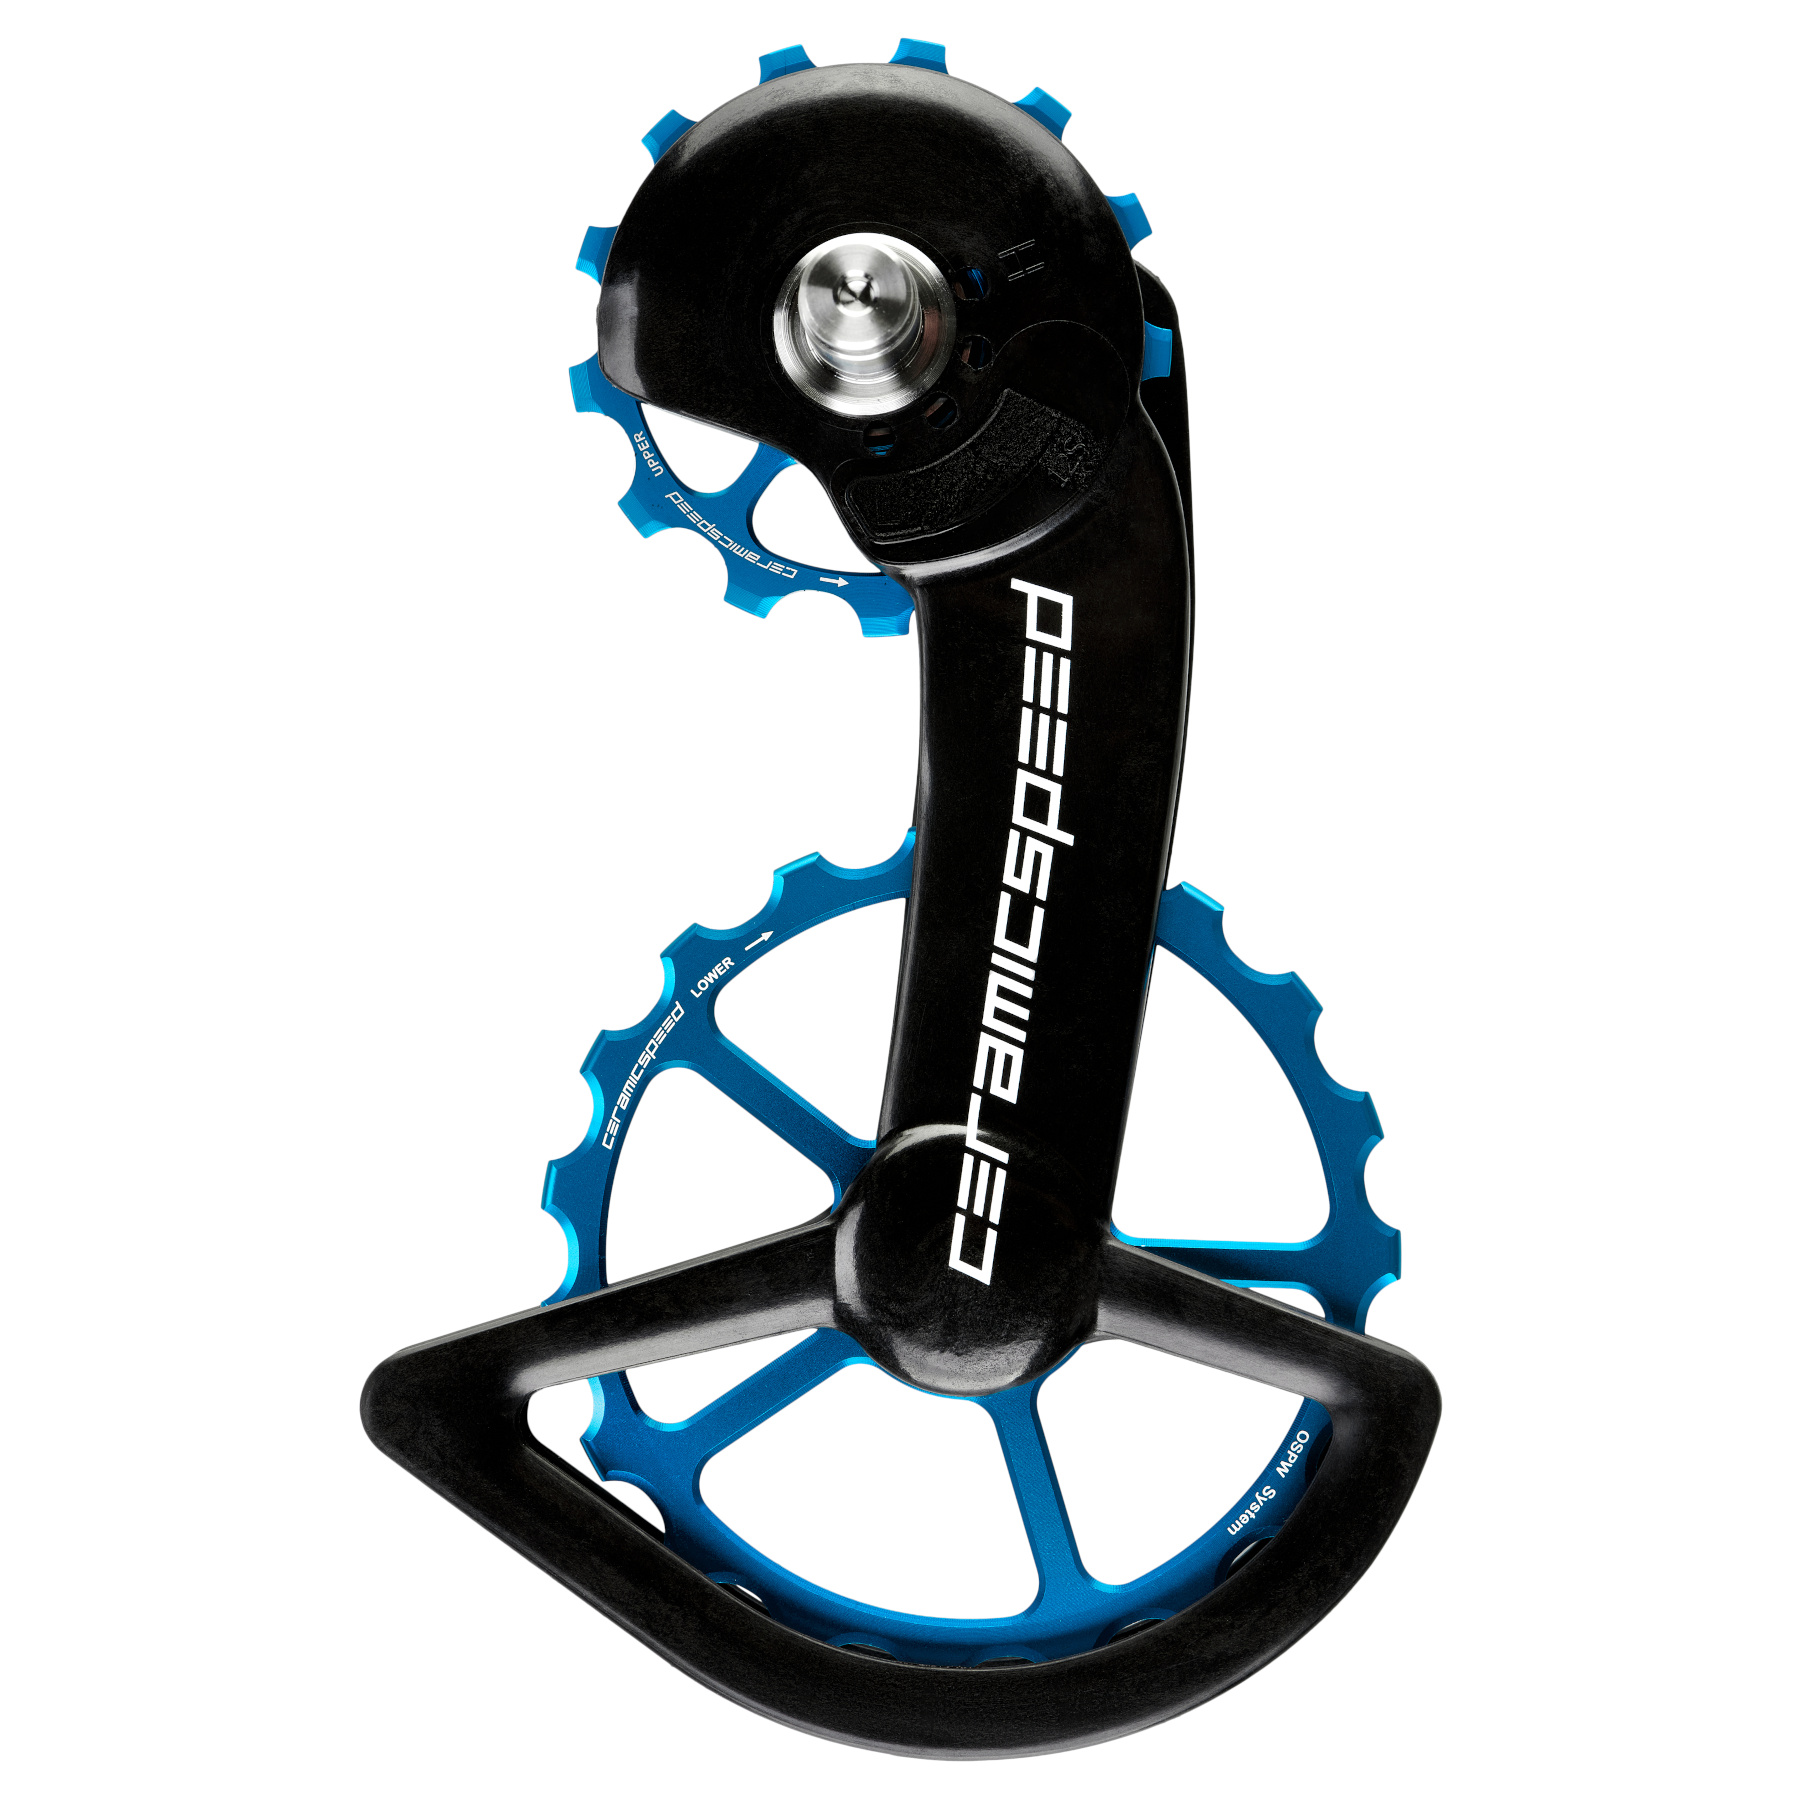 Picture of CeramicSpeed OSPW Derailleur Pulley System - for Shimano R9200/R8100 (12s) | 13/19 Teeth | Coated Bearings - blue